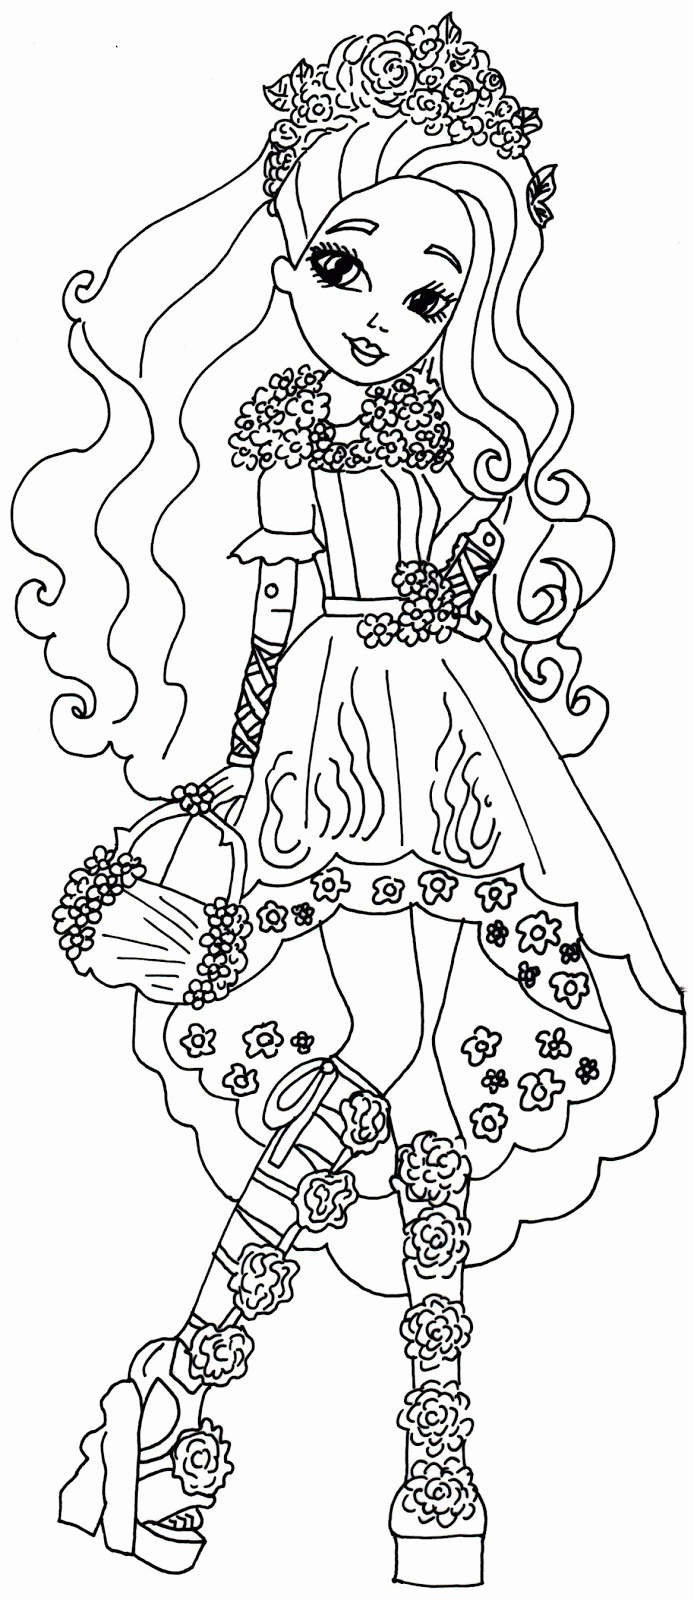 Free Printable Ever After High Coloring Pages: Cedar Wood Spring ...